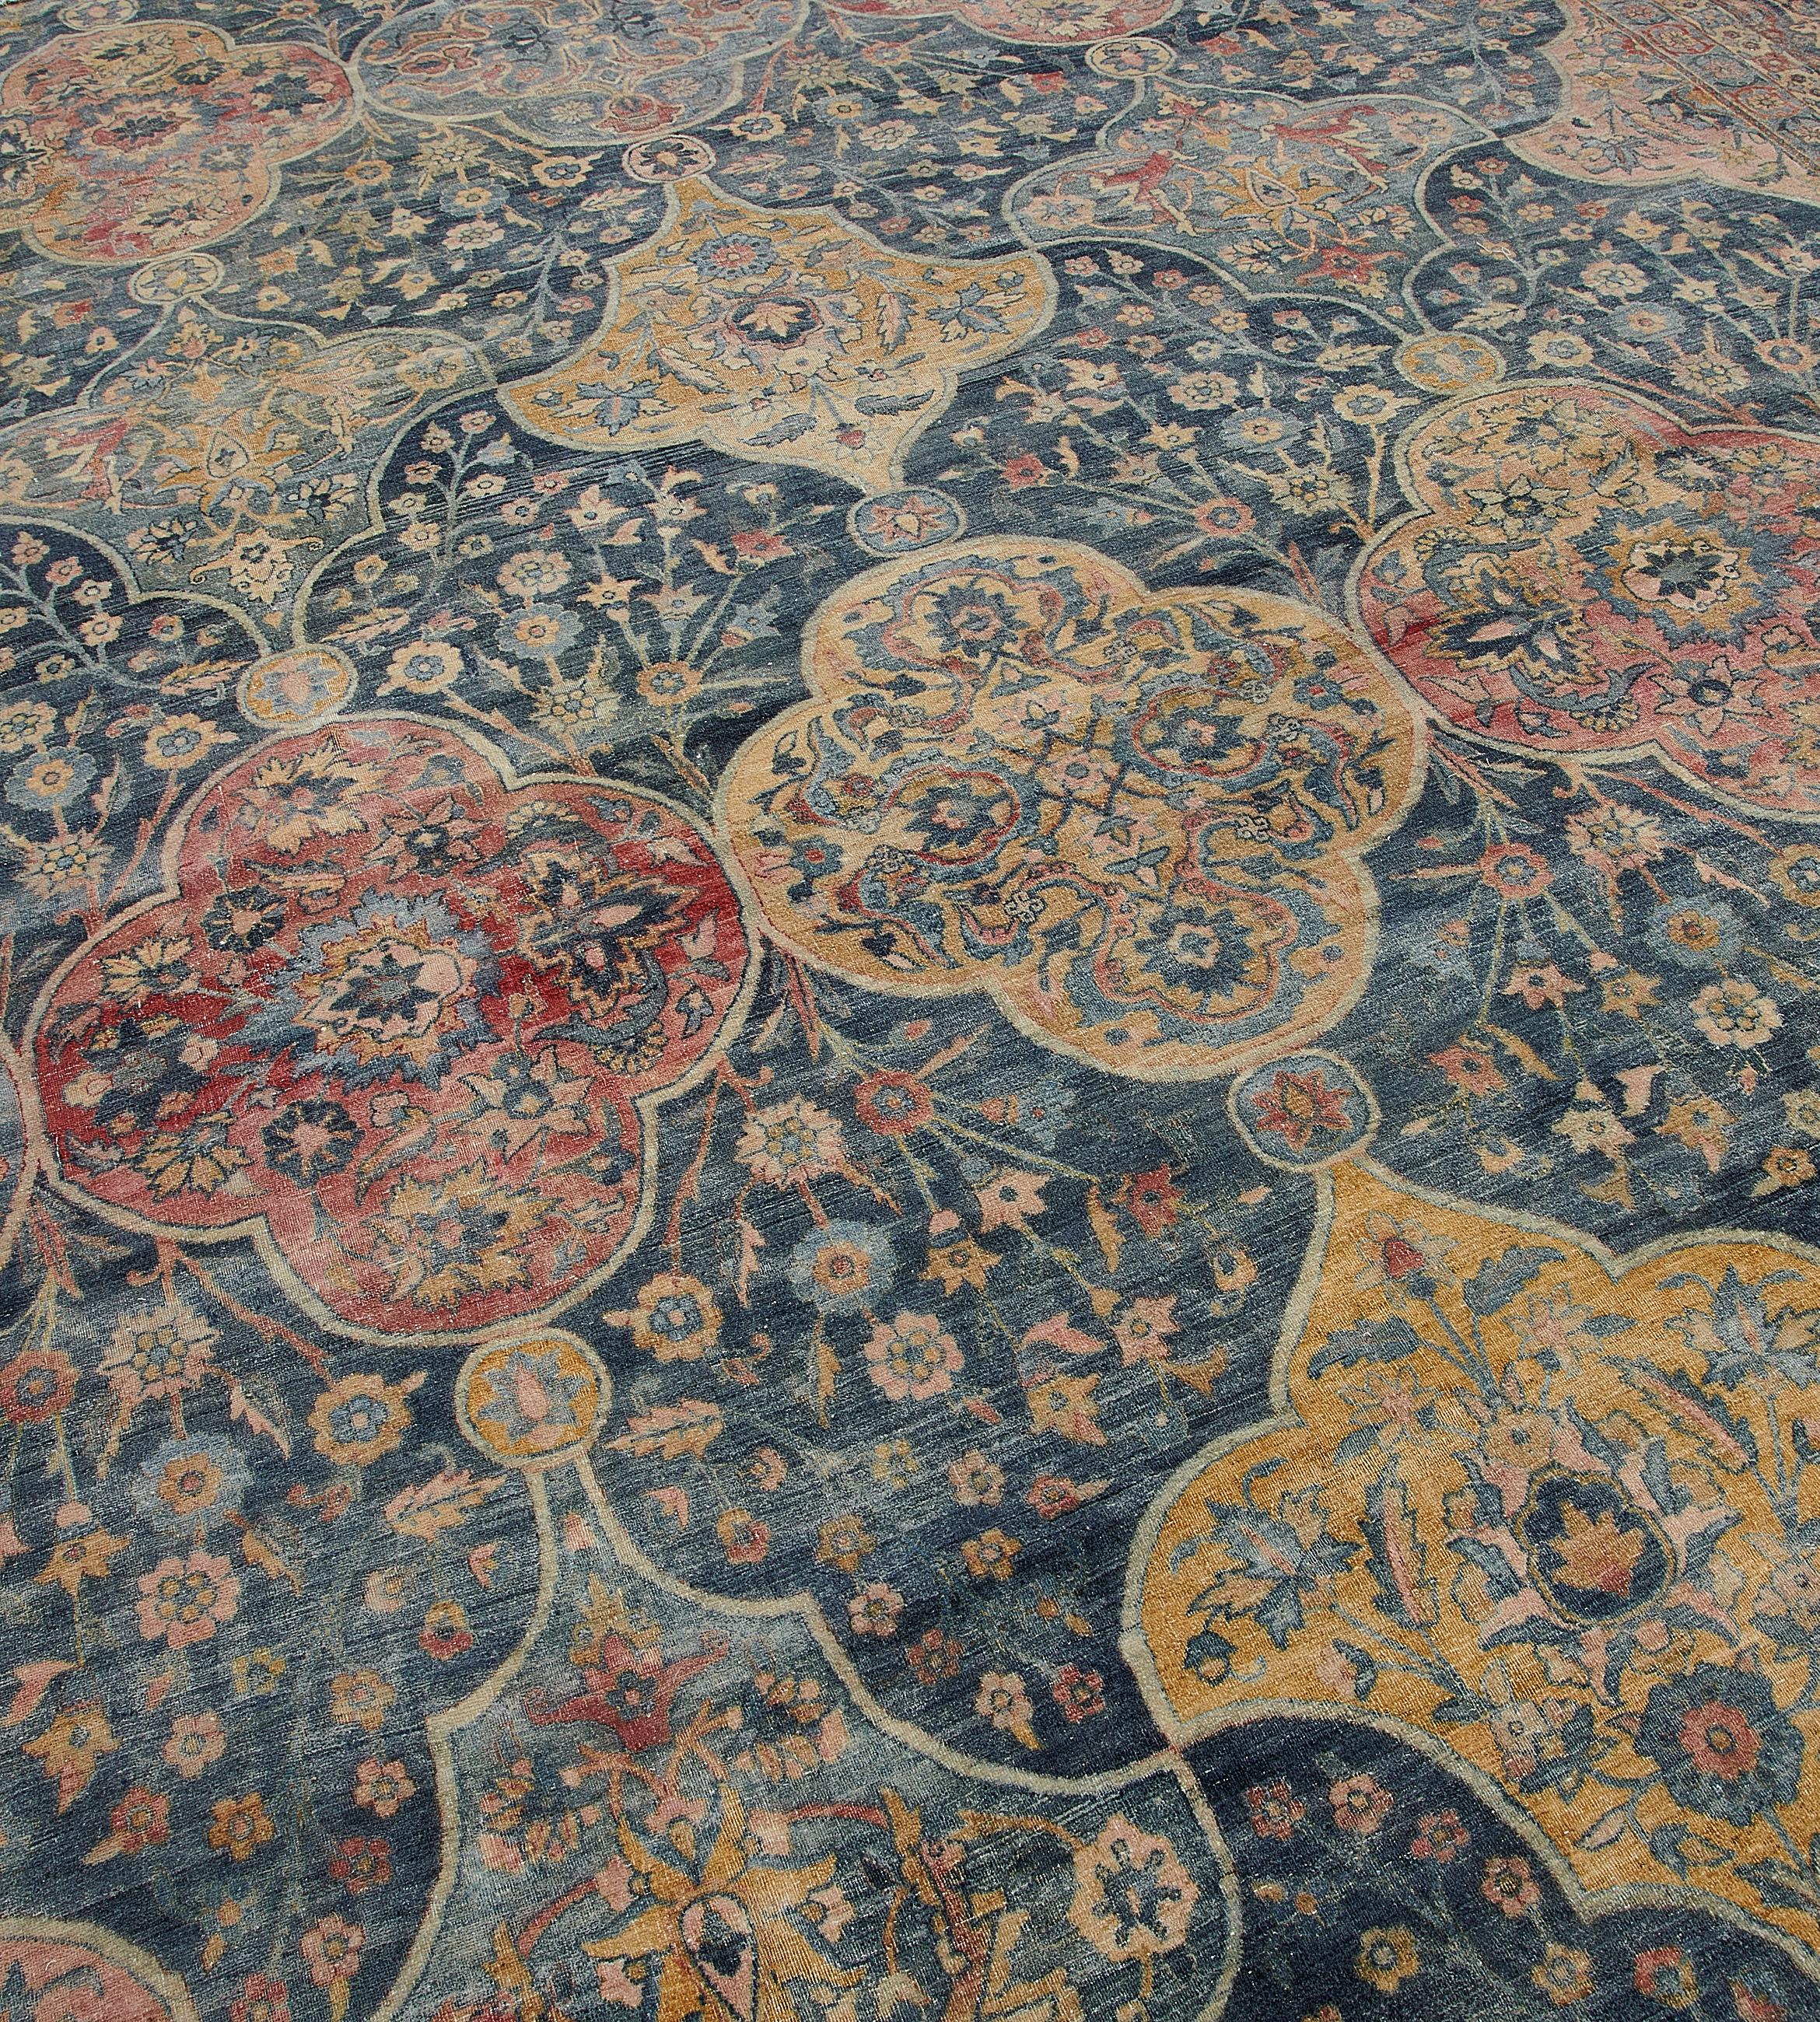 Hand-woven Antique Floral Persian Kirman Rug 11'x23' In Good Condition For Sale In West Hollywood, CA